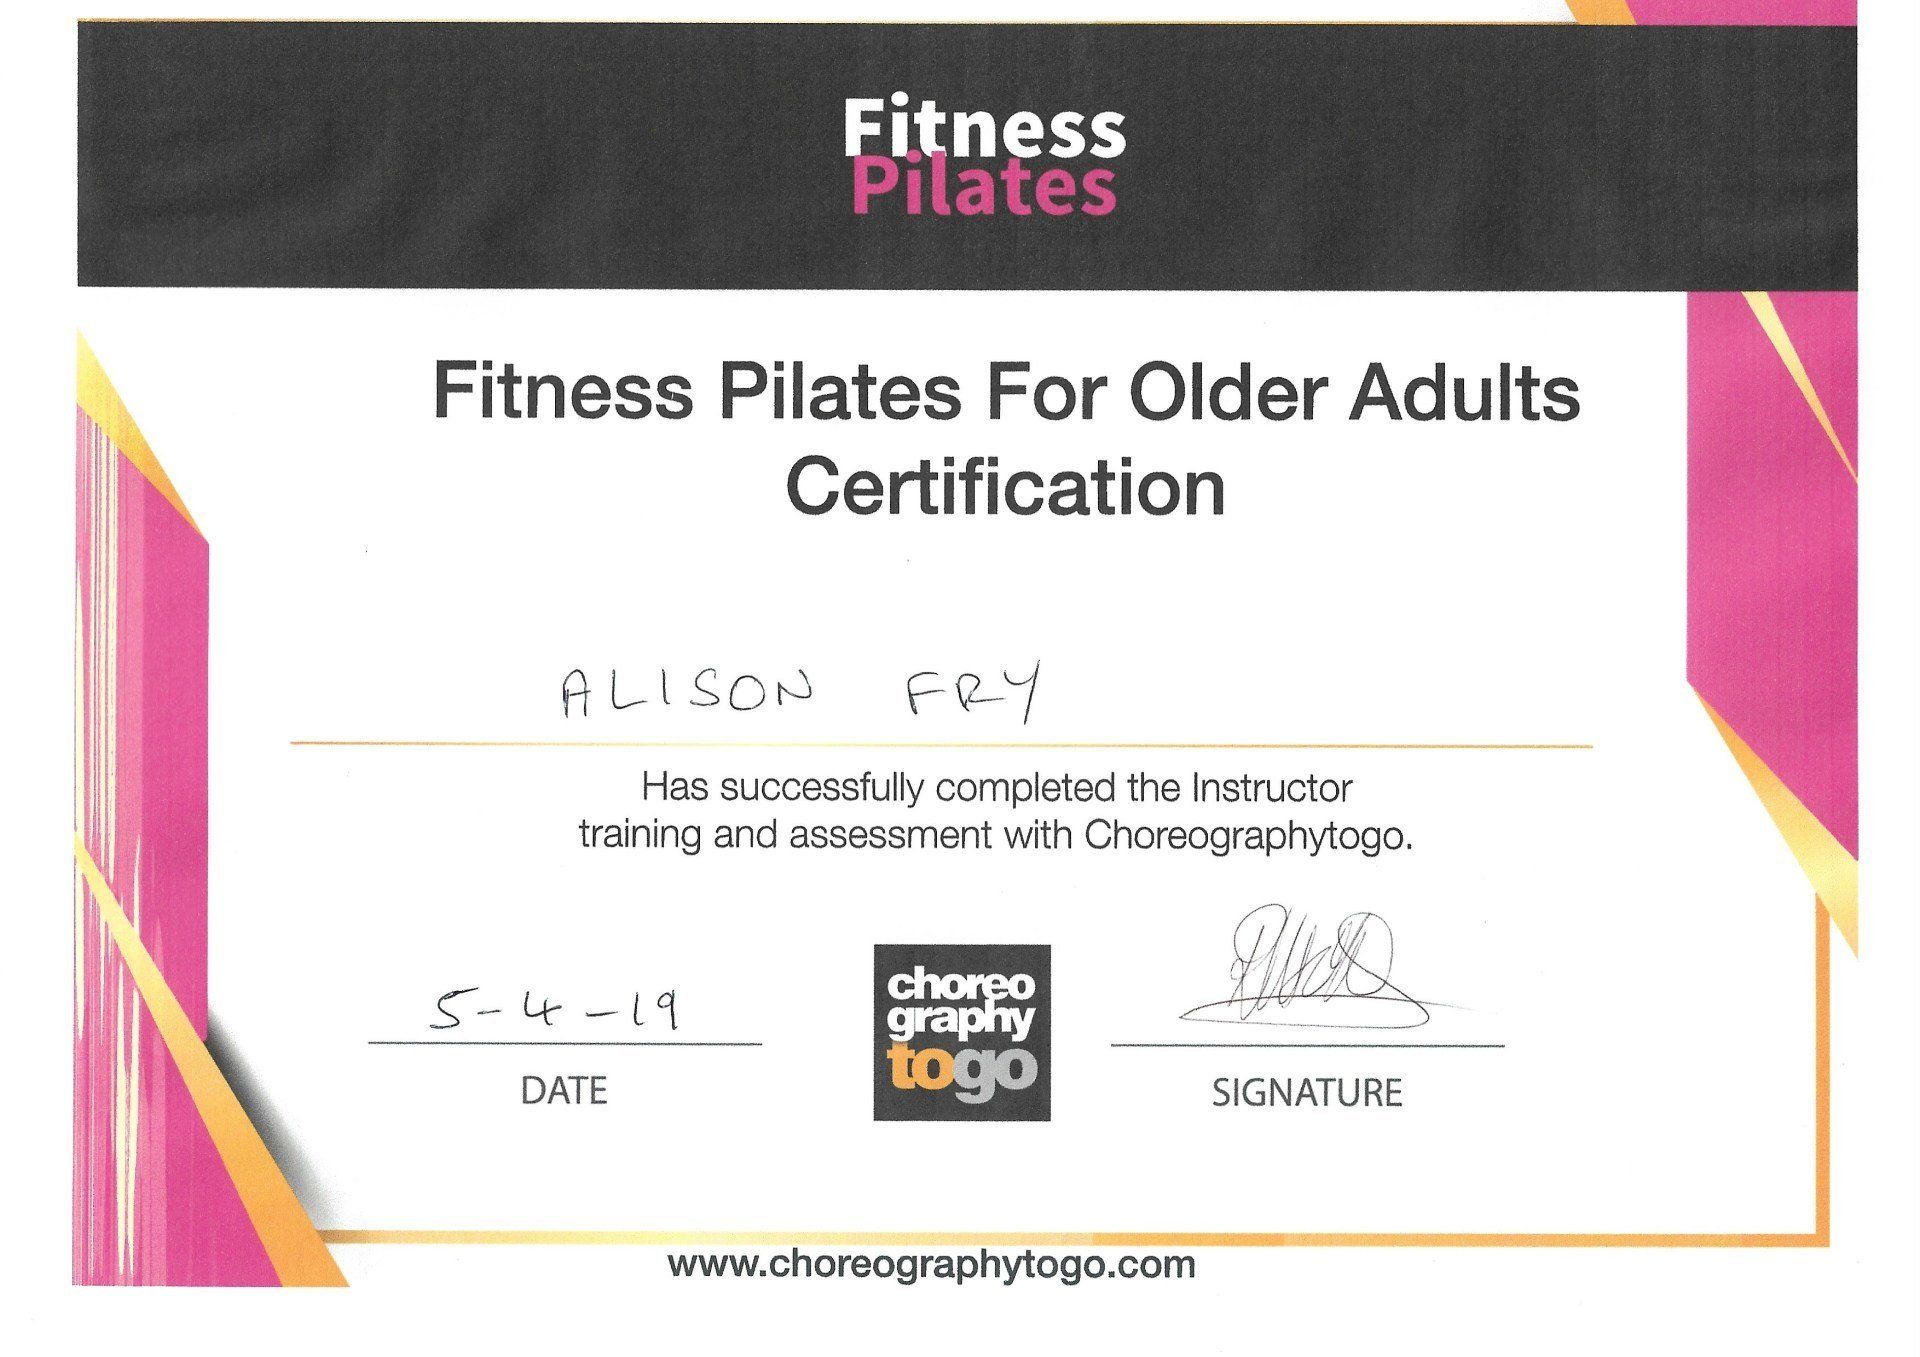 Fitness Pilates for Older Adults Certification - 5th April 2019